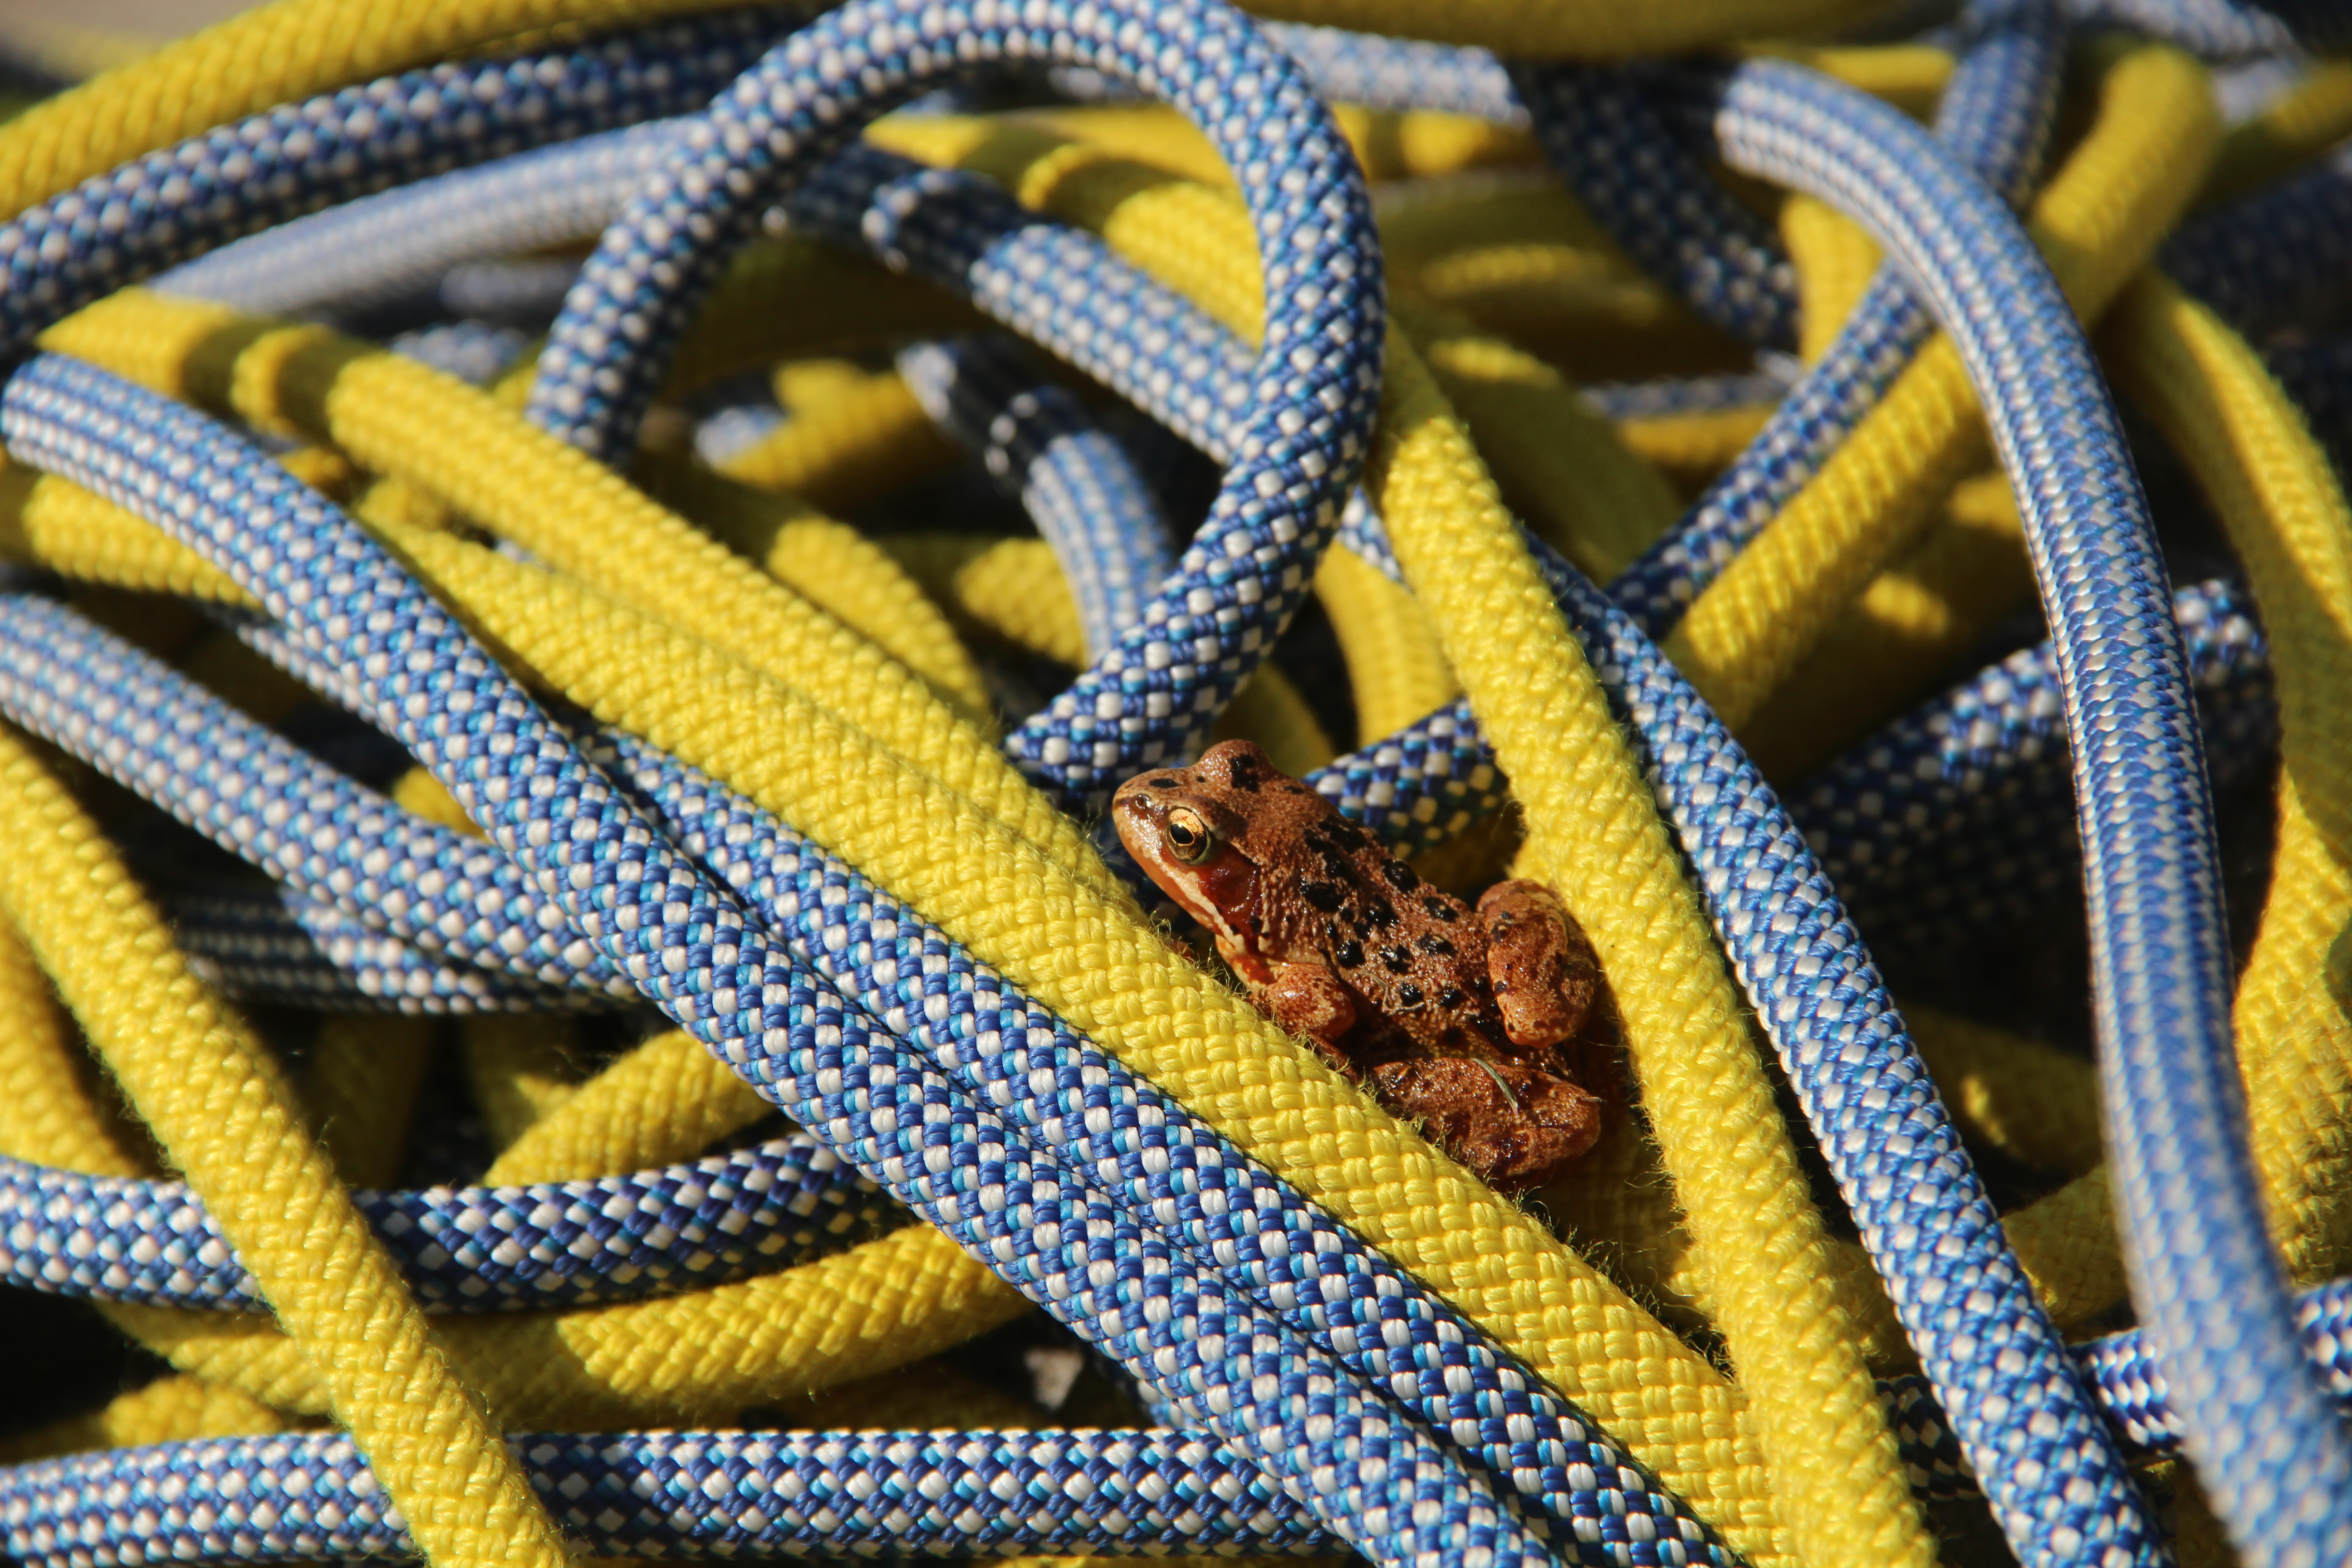 Can't pack your ropes away if there's a frog in the way!